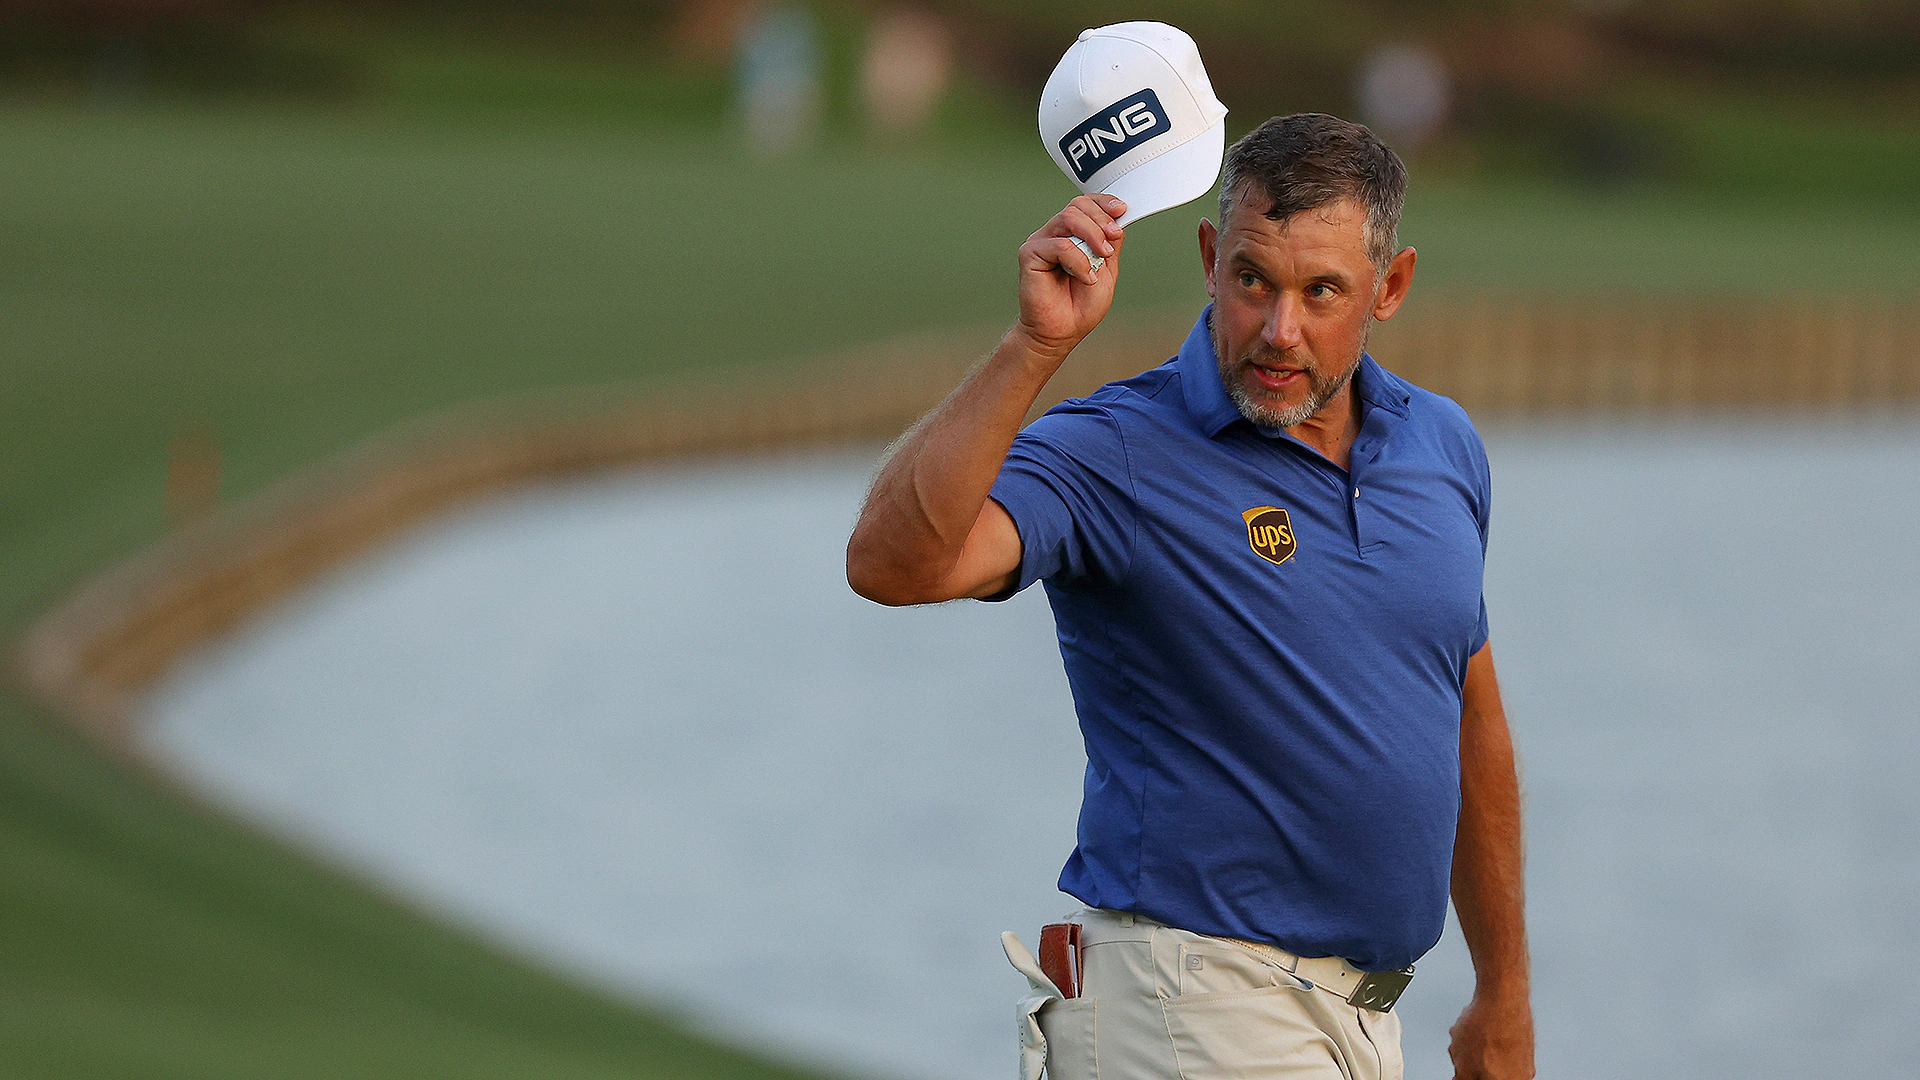 Lee Westwood leads Bryson DeChambeau again entering final round of The 2021 Players